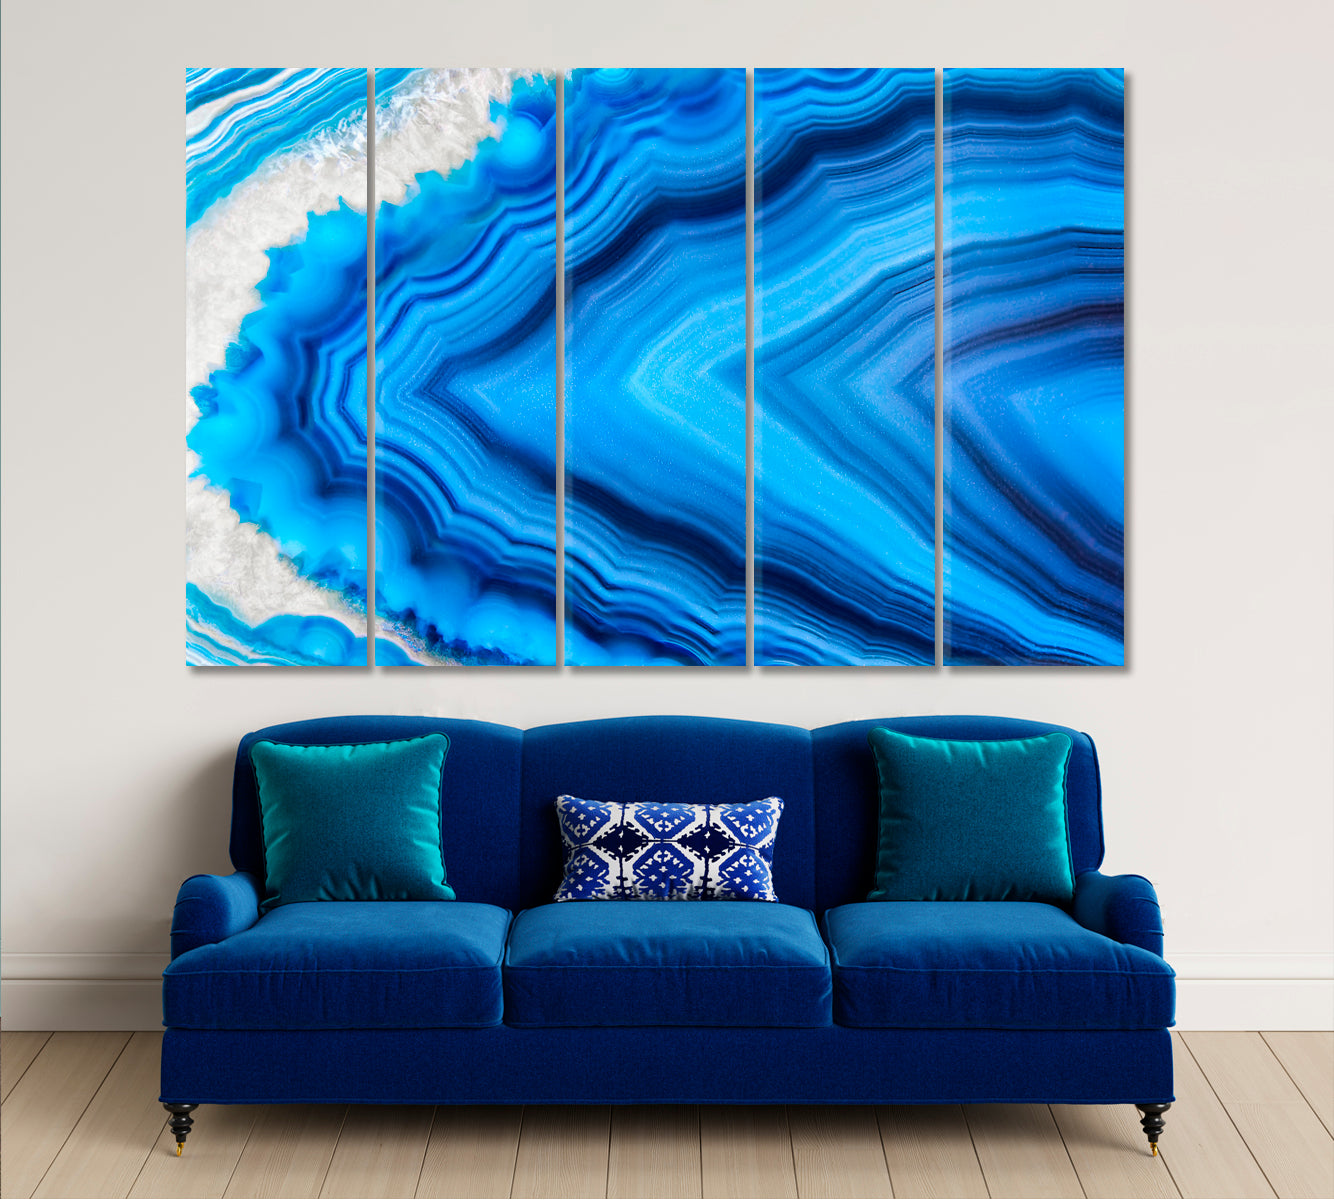 Amazing Blue Agate Crystal Cross Section Abstract Geode Art Abstract Art Print Artesty 5 panels 36" x 24" 